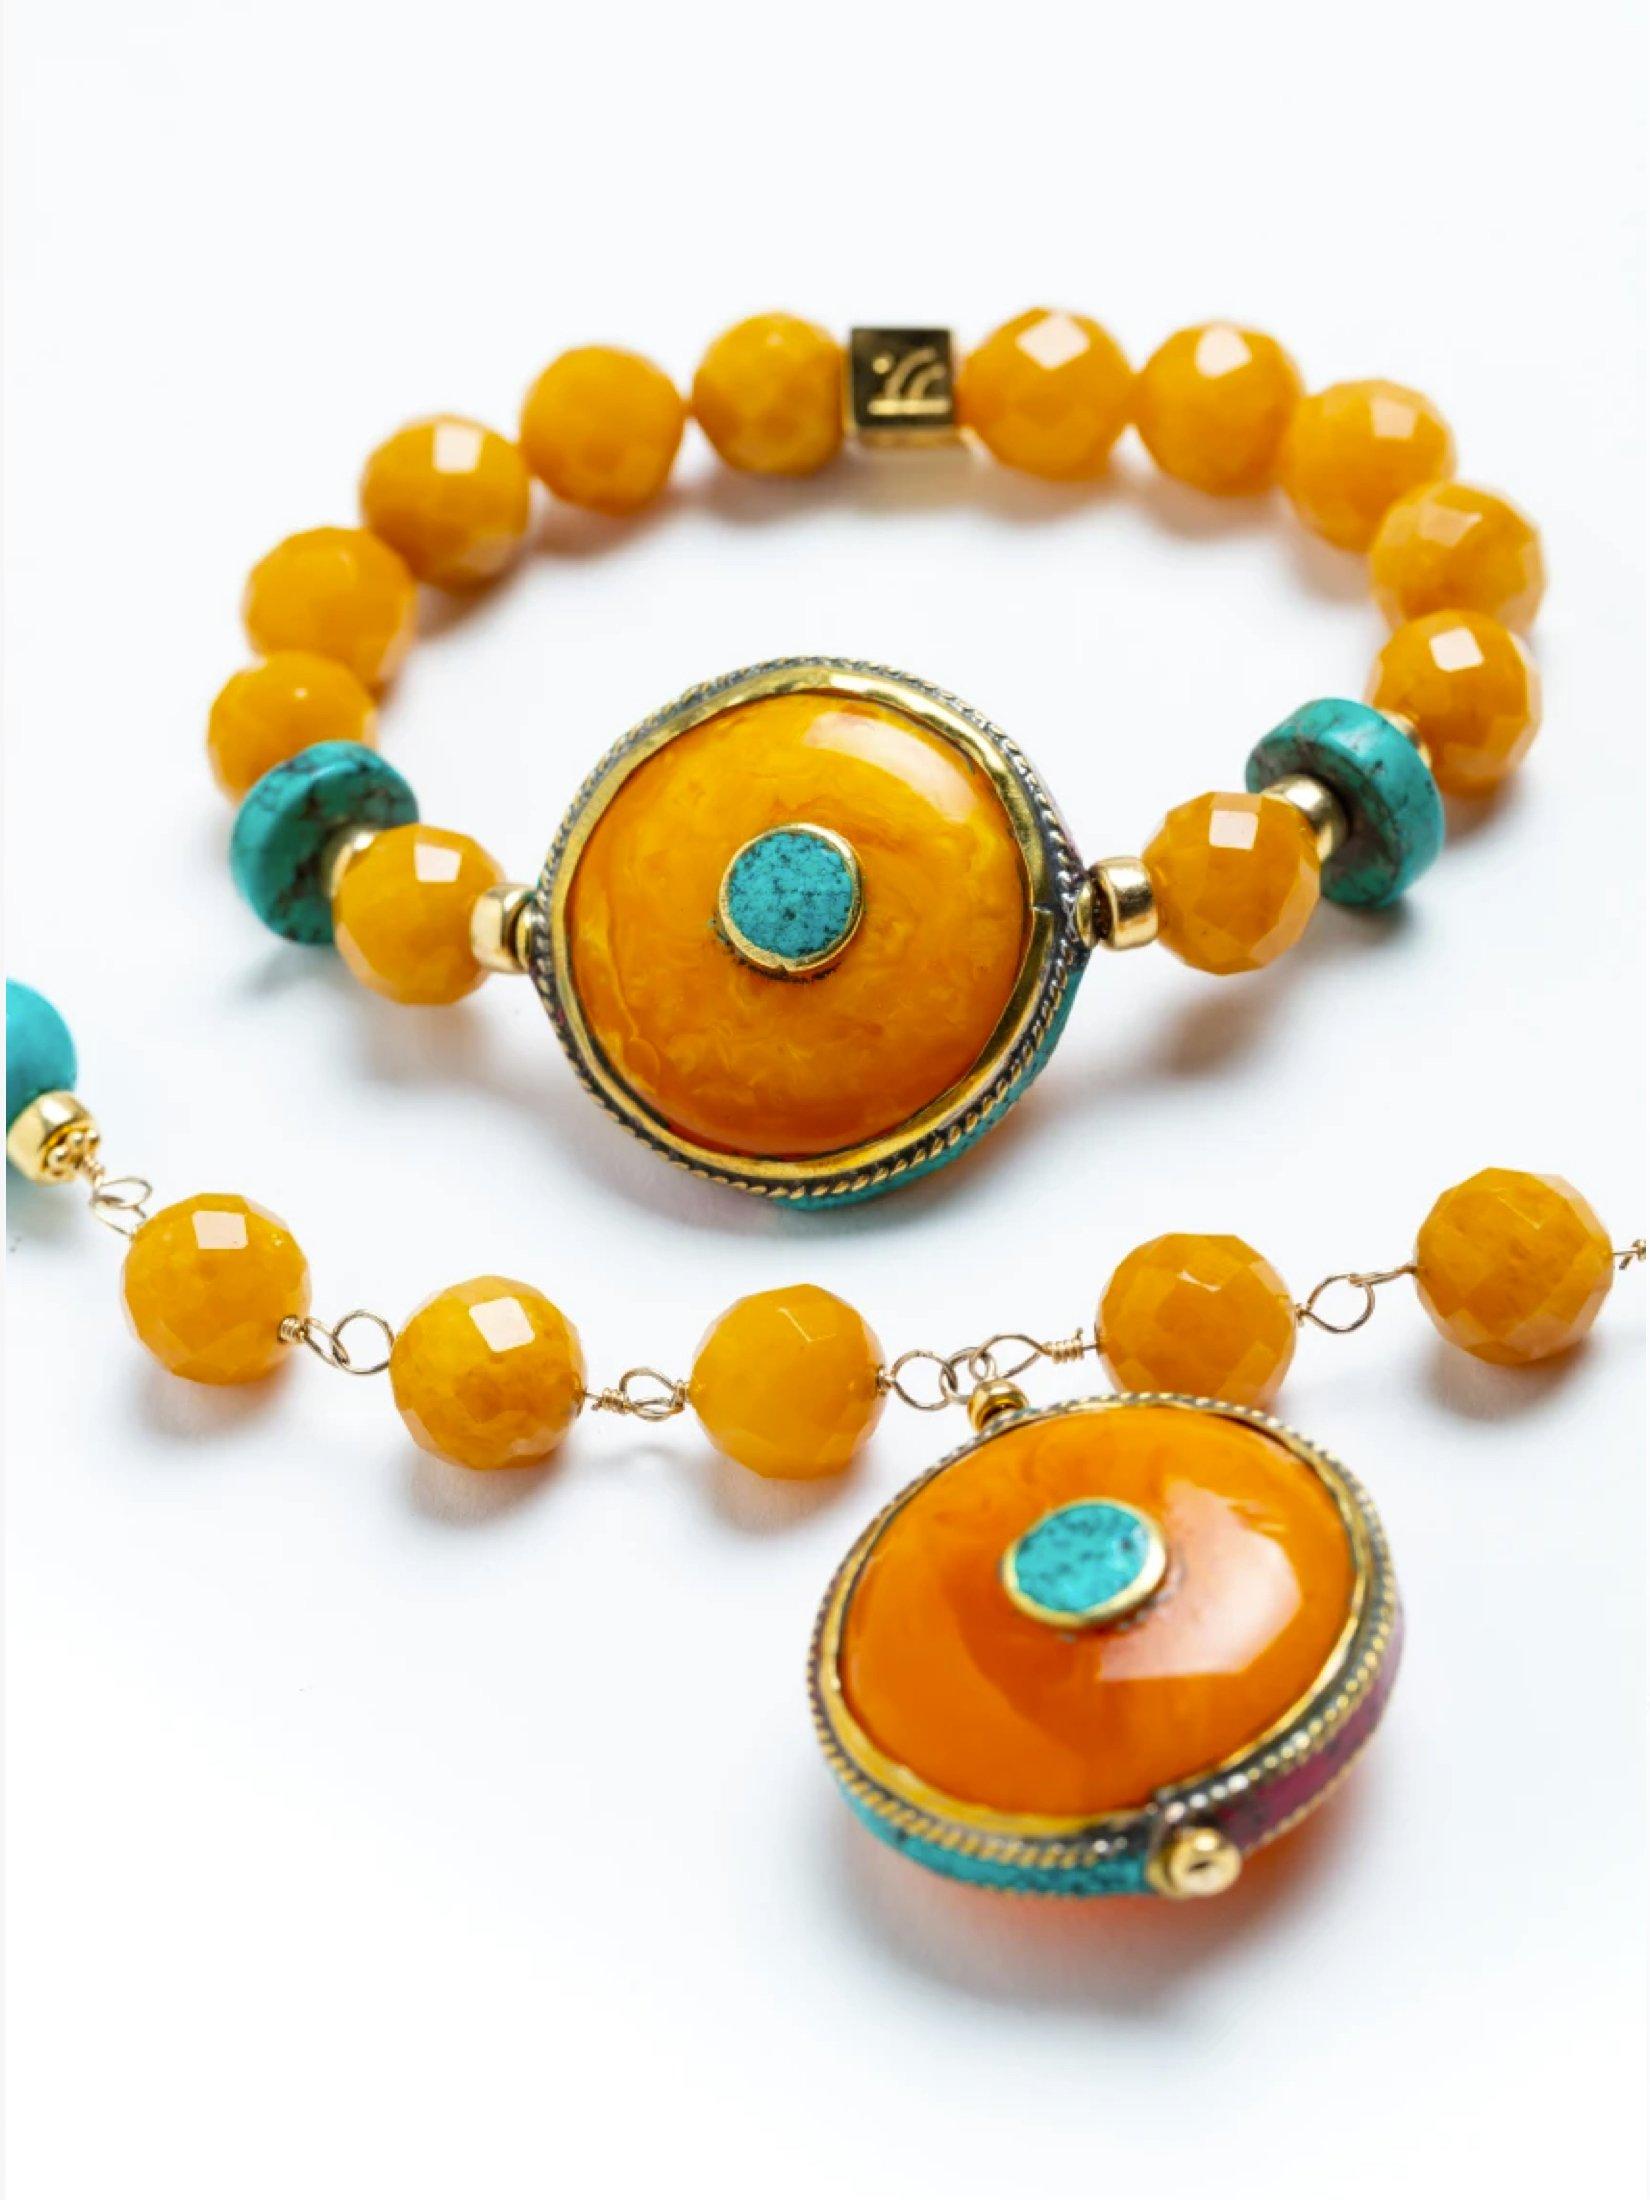 Story Behind the Jewelry
A key piece of a fall collection and tribute to our new designer Gracia.  The unique bracelet is comprised of golden jade and a Nepalese amber pendant.
Be sure to look at the matching necklace.

Properties
Golden Jade, Xiang